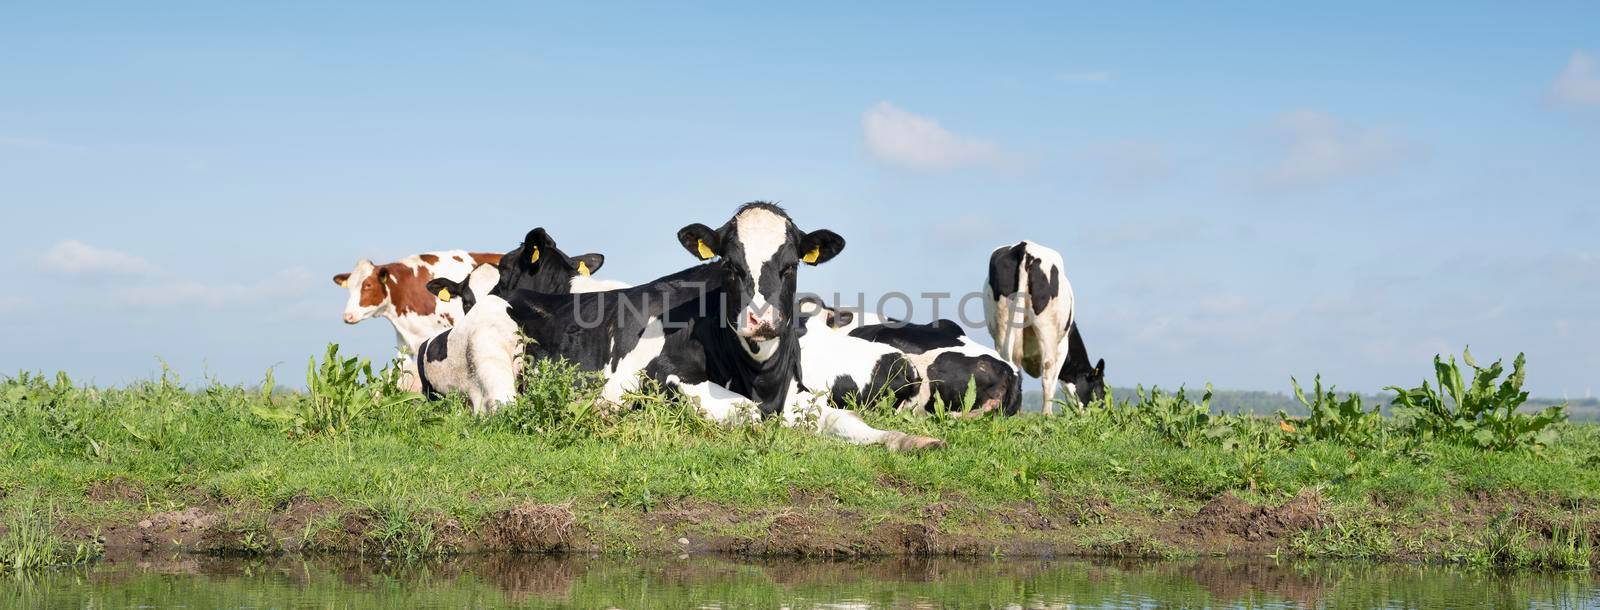 young spotted cows in dutch meadow near amersfoort in holland by ahavelaar